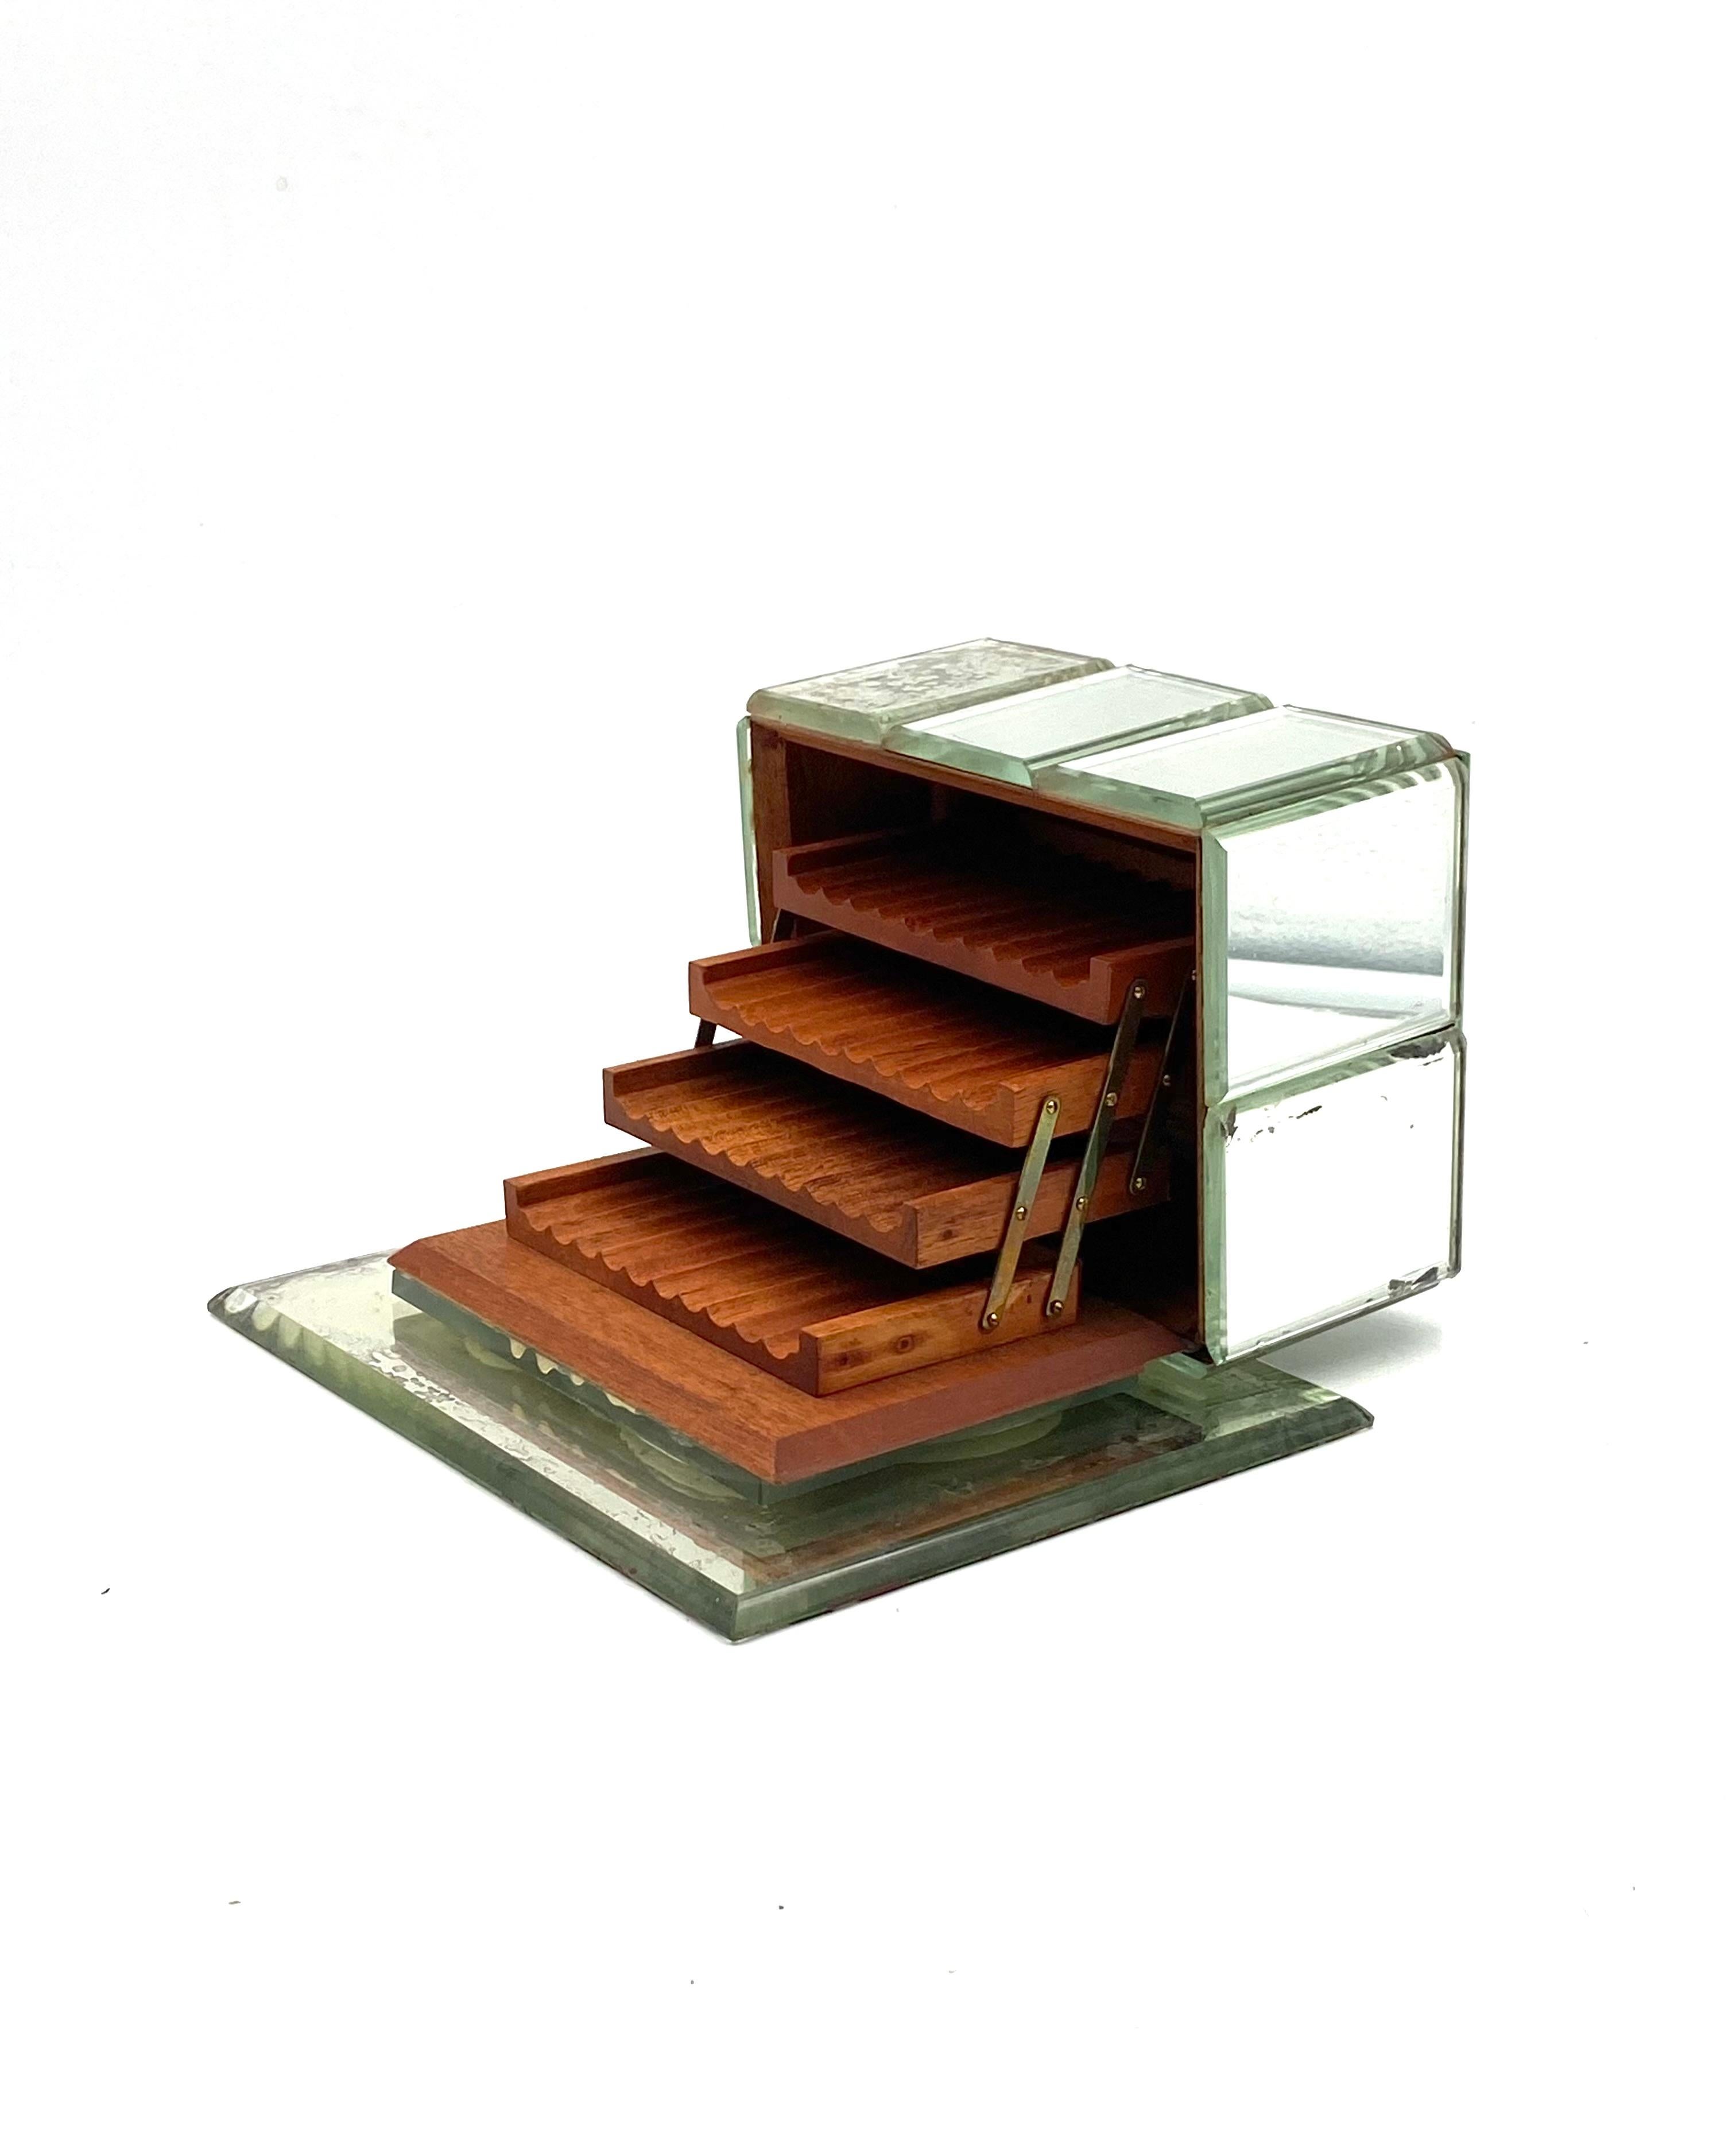 Art Déco mirrored cigarette box 

Italy 1940

Etched and bevelled mirrored box sits on midnight mirrored glass base. Opens to 3 cedar wood shelves.

H 11 cm - 21 x 17 cm

Conditions: good consistent with age and use, Mirror ageing in multiple places